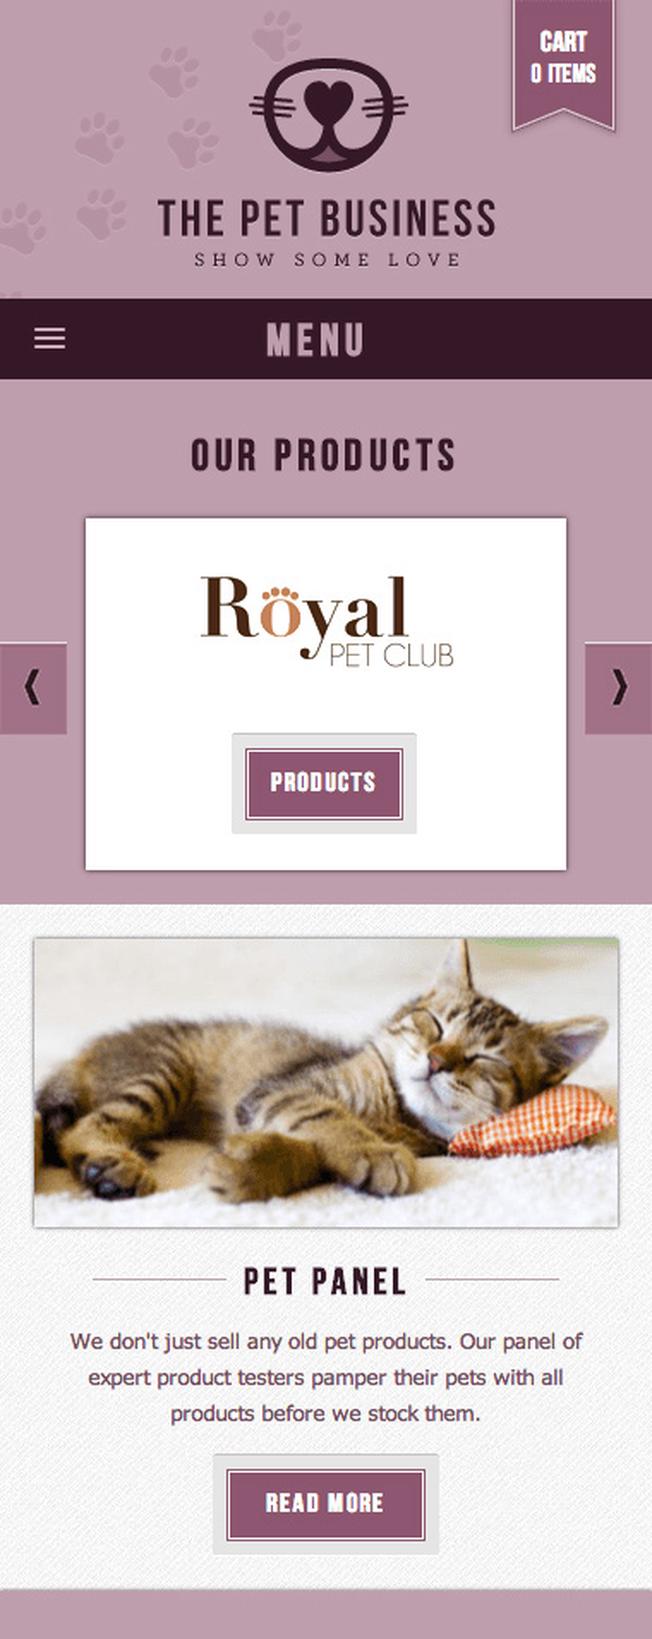 The Pet Business home page mobile view.